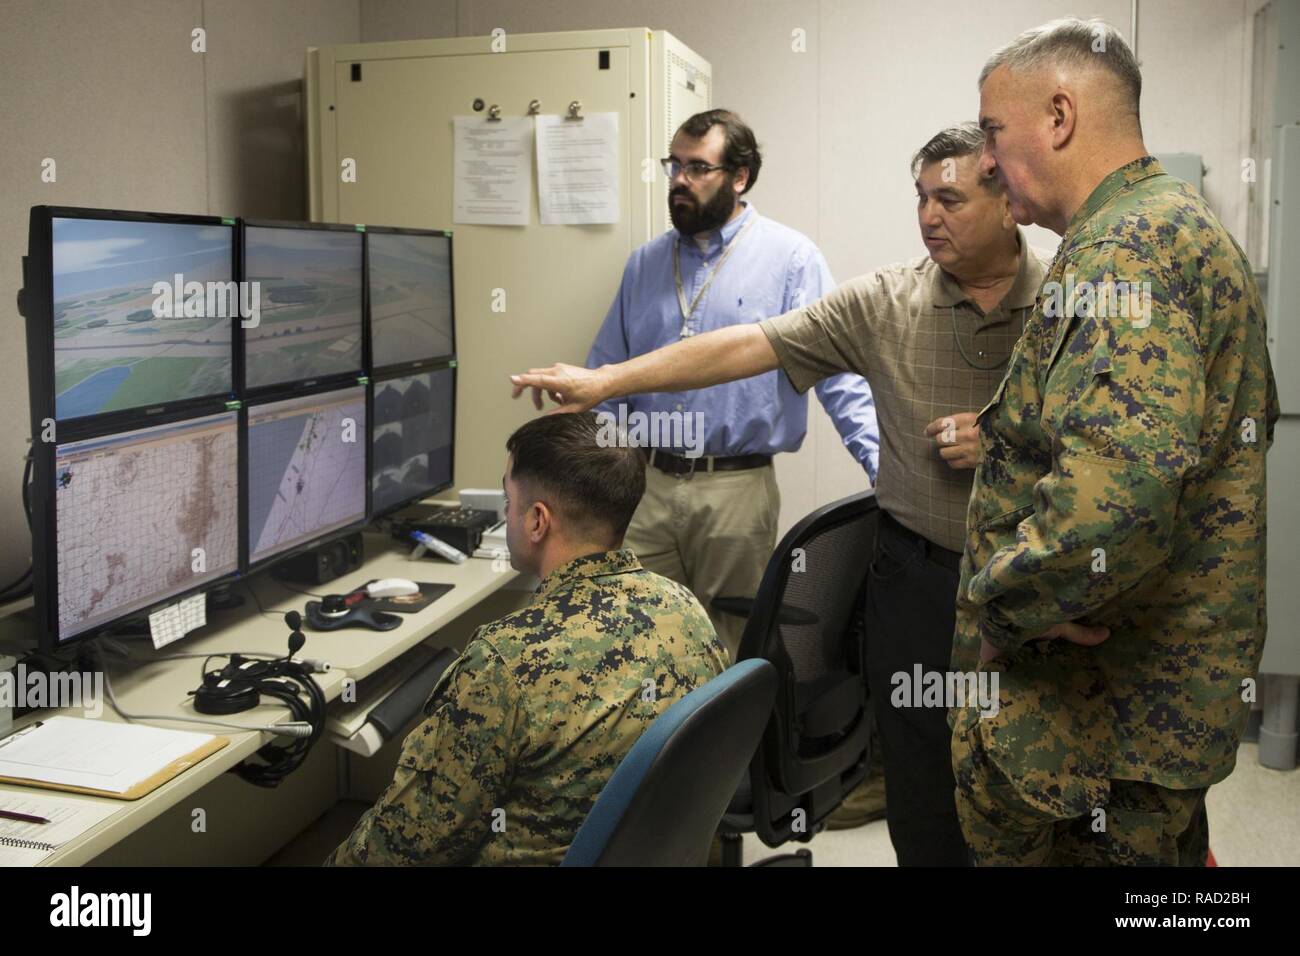 Mr. Lance Jeffrey, Training Support Center Lead, Training and Education Command, briefs Gen. Glenn Walters the Assistant Commandant of the Marine Corps on the usage of simulator training systems during a visit to Camp Lejeune, N.C., Jan. 26, 2017. The purpose of the visit was to increase awareness and capabilities of ground simulation and simulator training systems in support of operational forces combat readiness. Stock Photo